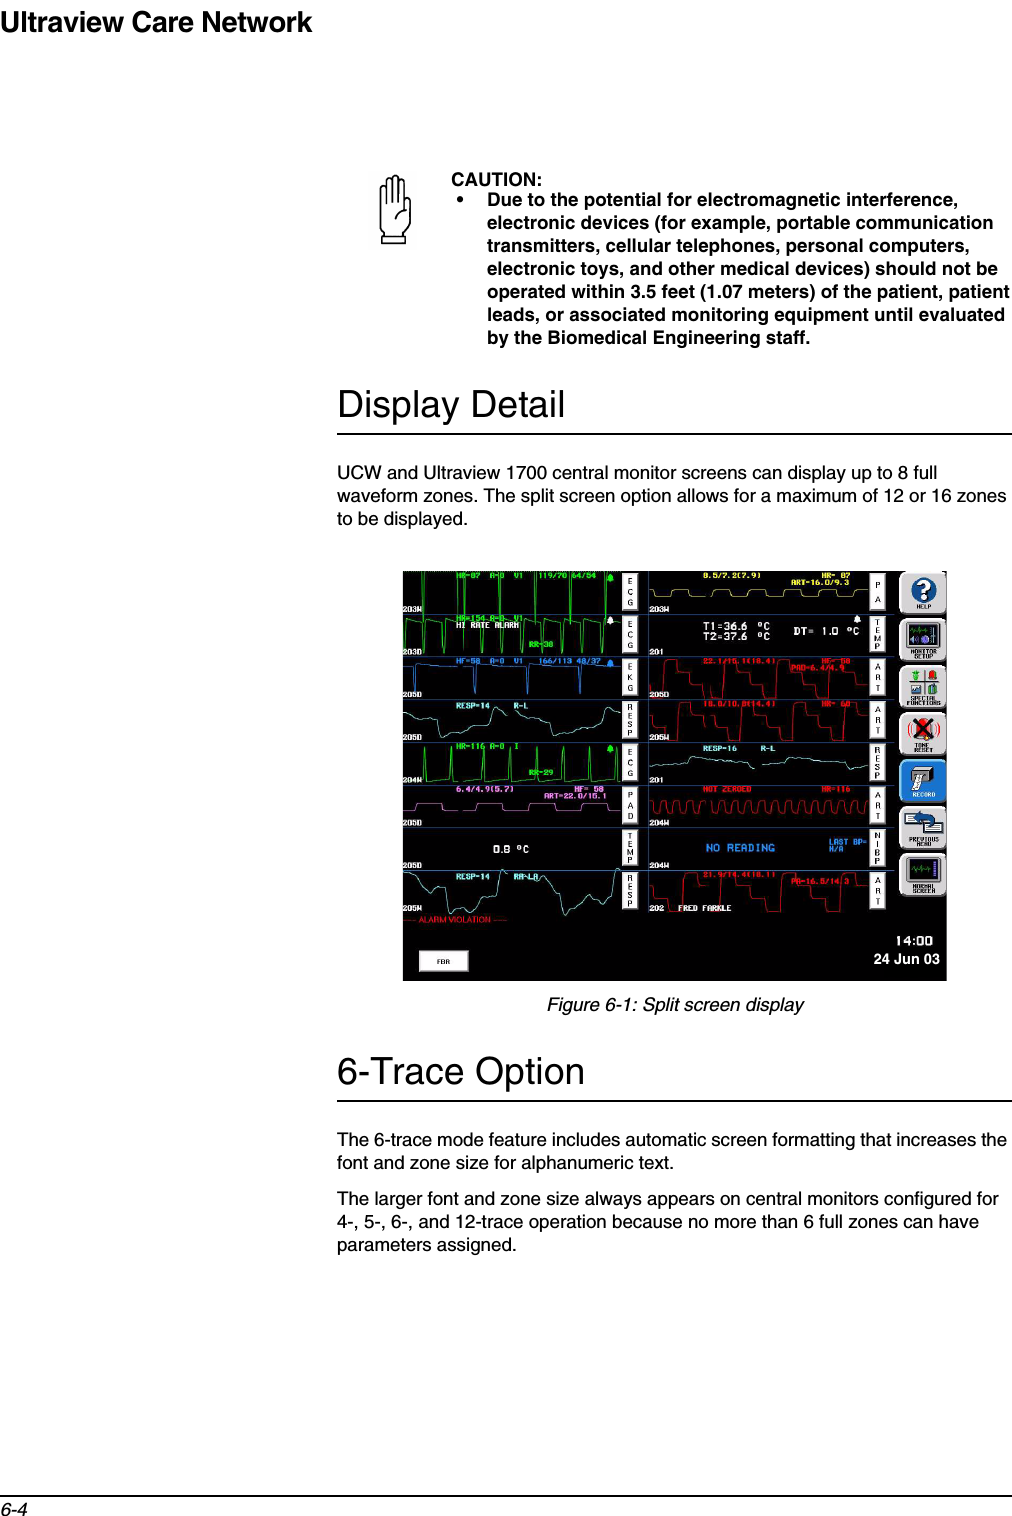 Ultraview Care Network6-4Display DetailUCW and Ultraview 1700 central monitor screens can display up to 8 full waveform zones. The split screen option allows for a maximum of 12 or 16 zones to be displayed. Figure 6-1: Split screen display6-Trace OptionThe 6-trace mode feature includes automatic screen formatting that increases the font and zone size for alphanumeric text.The larger font and zone size always appears on central monitors configured for 4-, 5-, 6-, and 12-trace operation because no more than 6 full zones can have parameters assigned. CAUTION:• Due to the potential for electromagnetic interference, electronic devices (for example, portable communication transmitters, cellular telephones, personal computers, electronic toys, and other medical devices) should not be operated within 3.5 feet (1.07 meters) of the patient, patient leads, or associated monitoring equipment until evaluated by the Biomedical Engineering staff.24 Jun 03